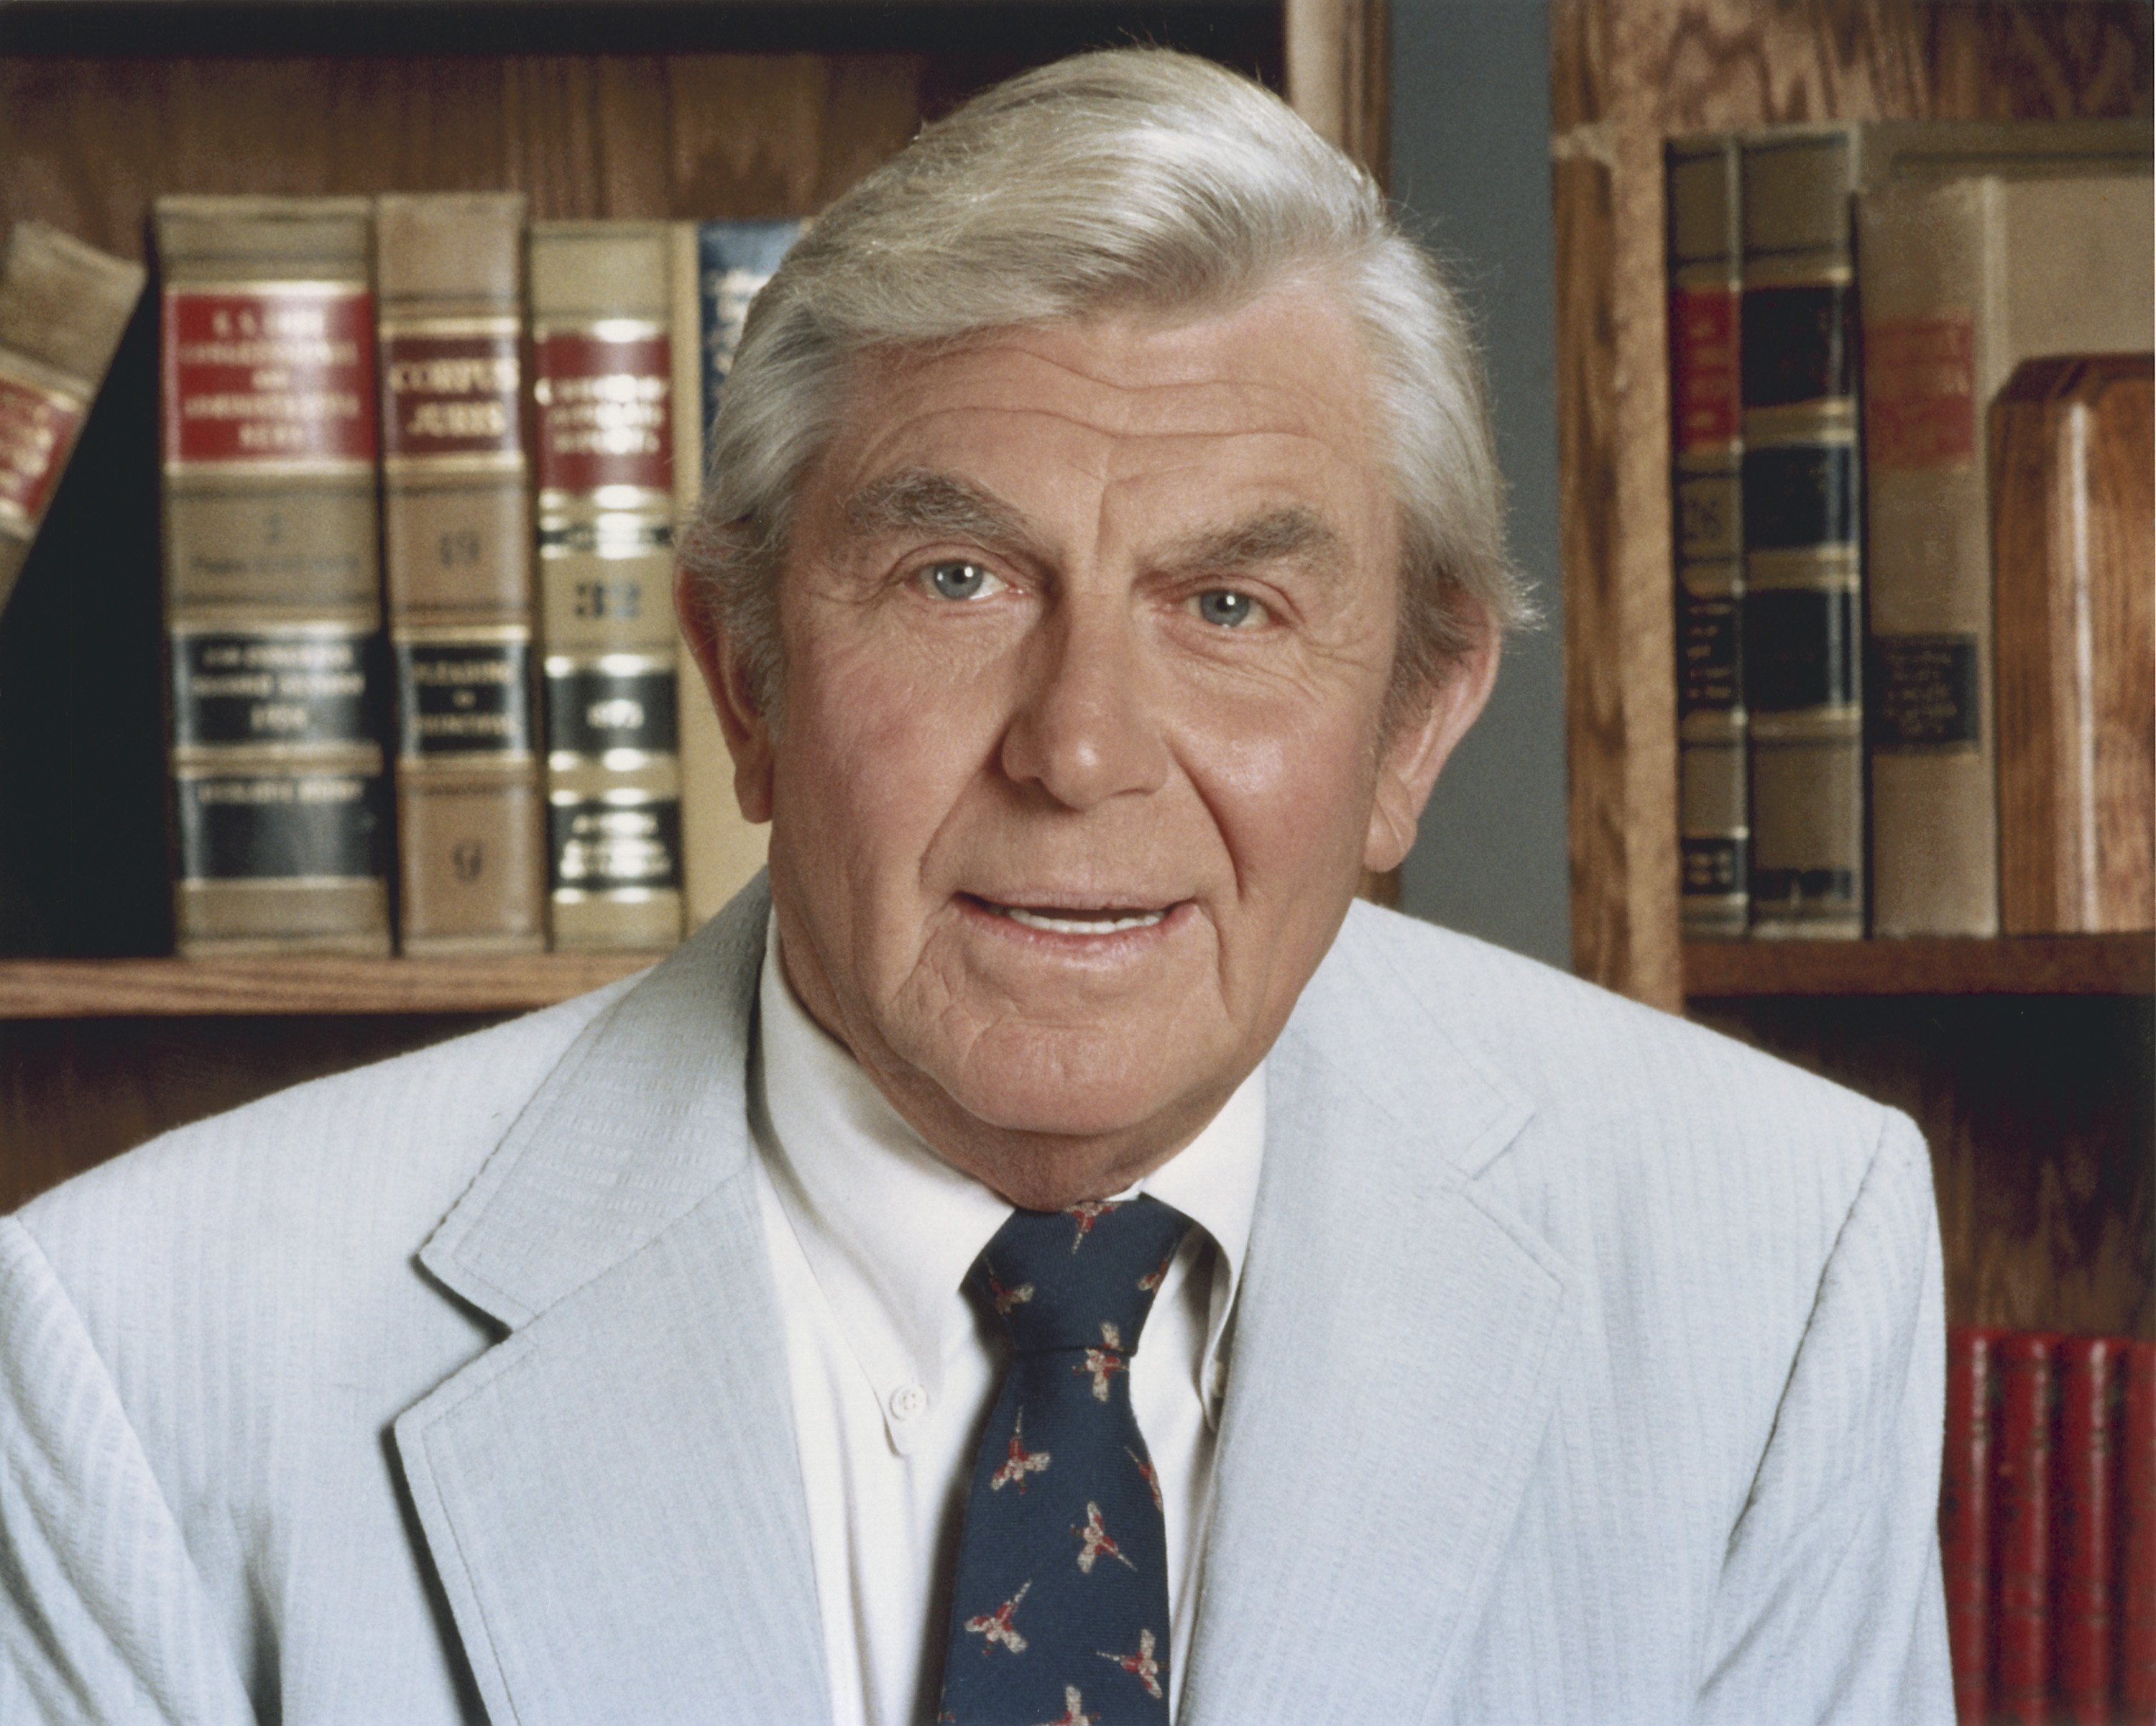 Andy Griffith as Benjamin Matlock on season 5 of "Matlock." | Source: Getty Images